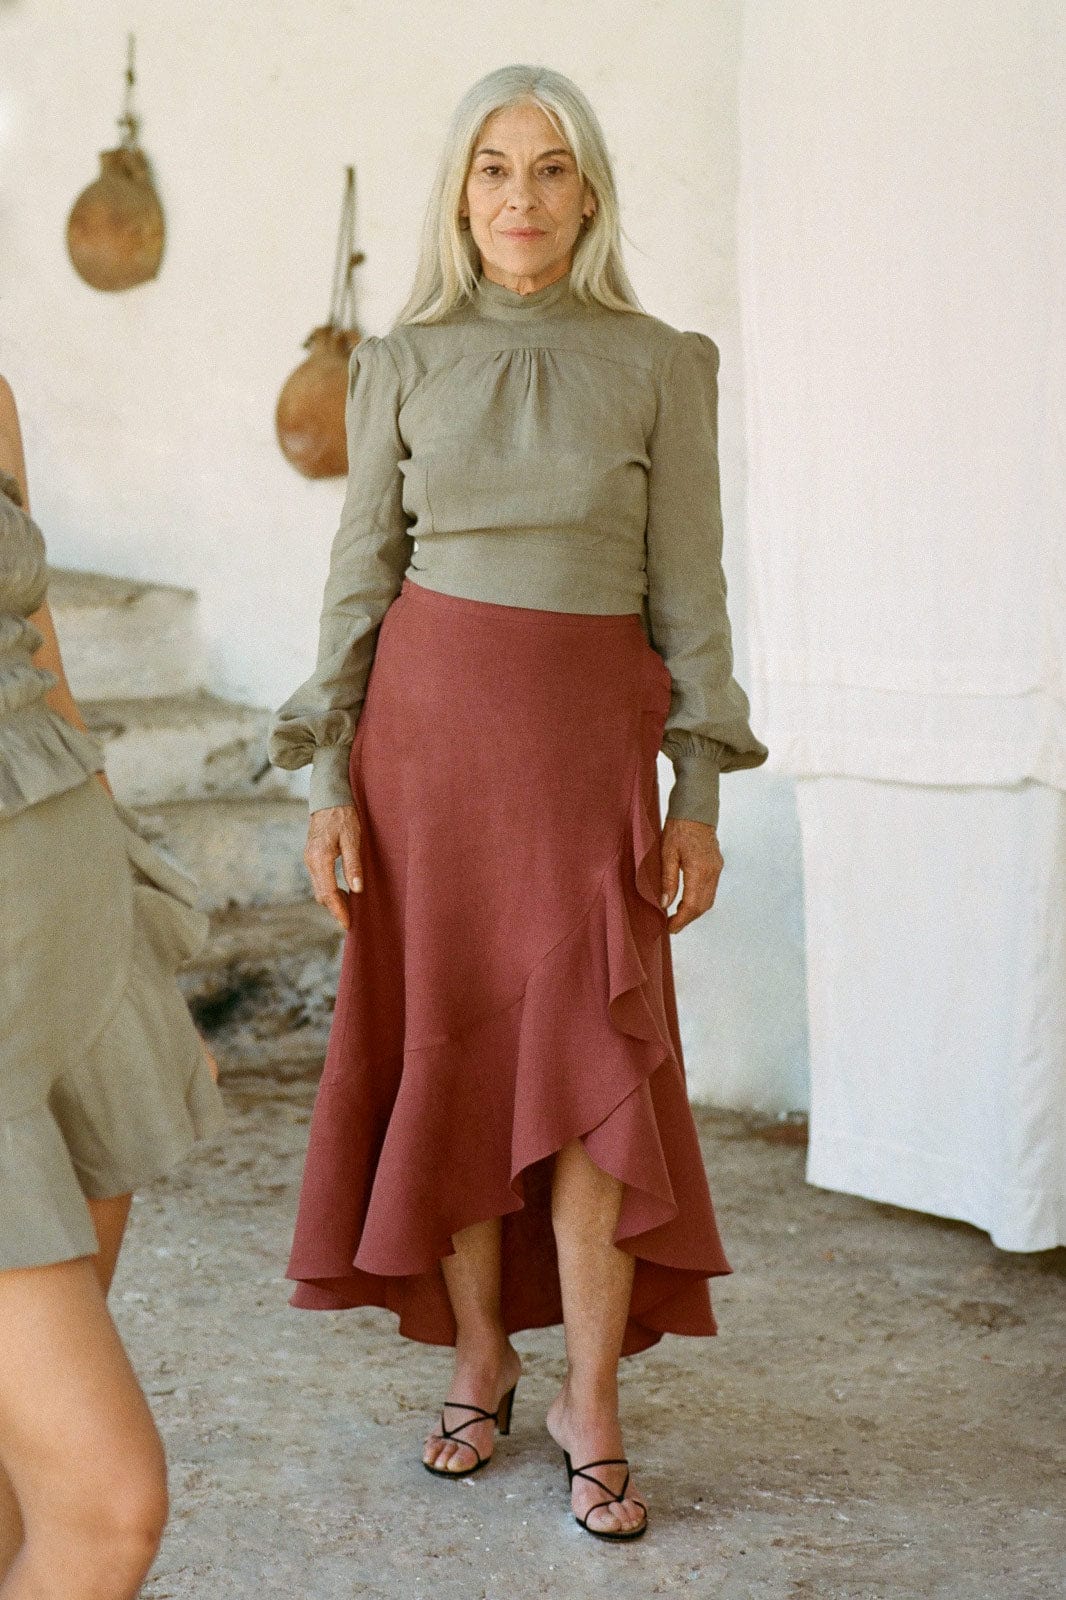 arkitaip Tops The Gabri Linen Wrap Top in taupe - Sample